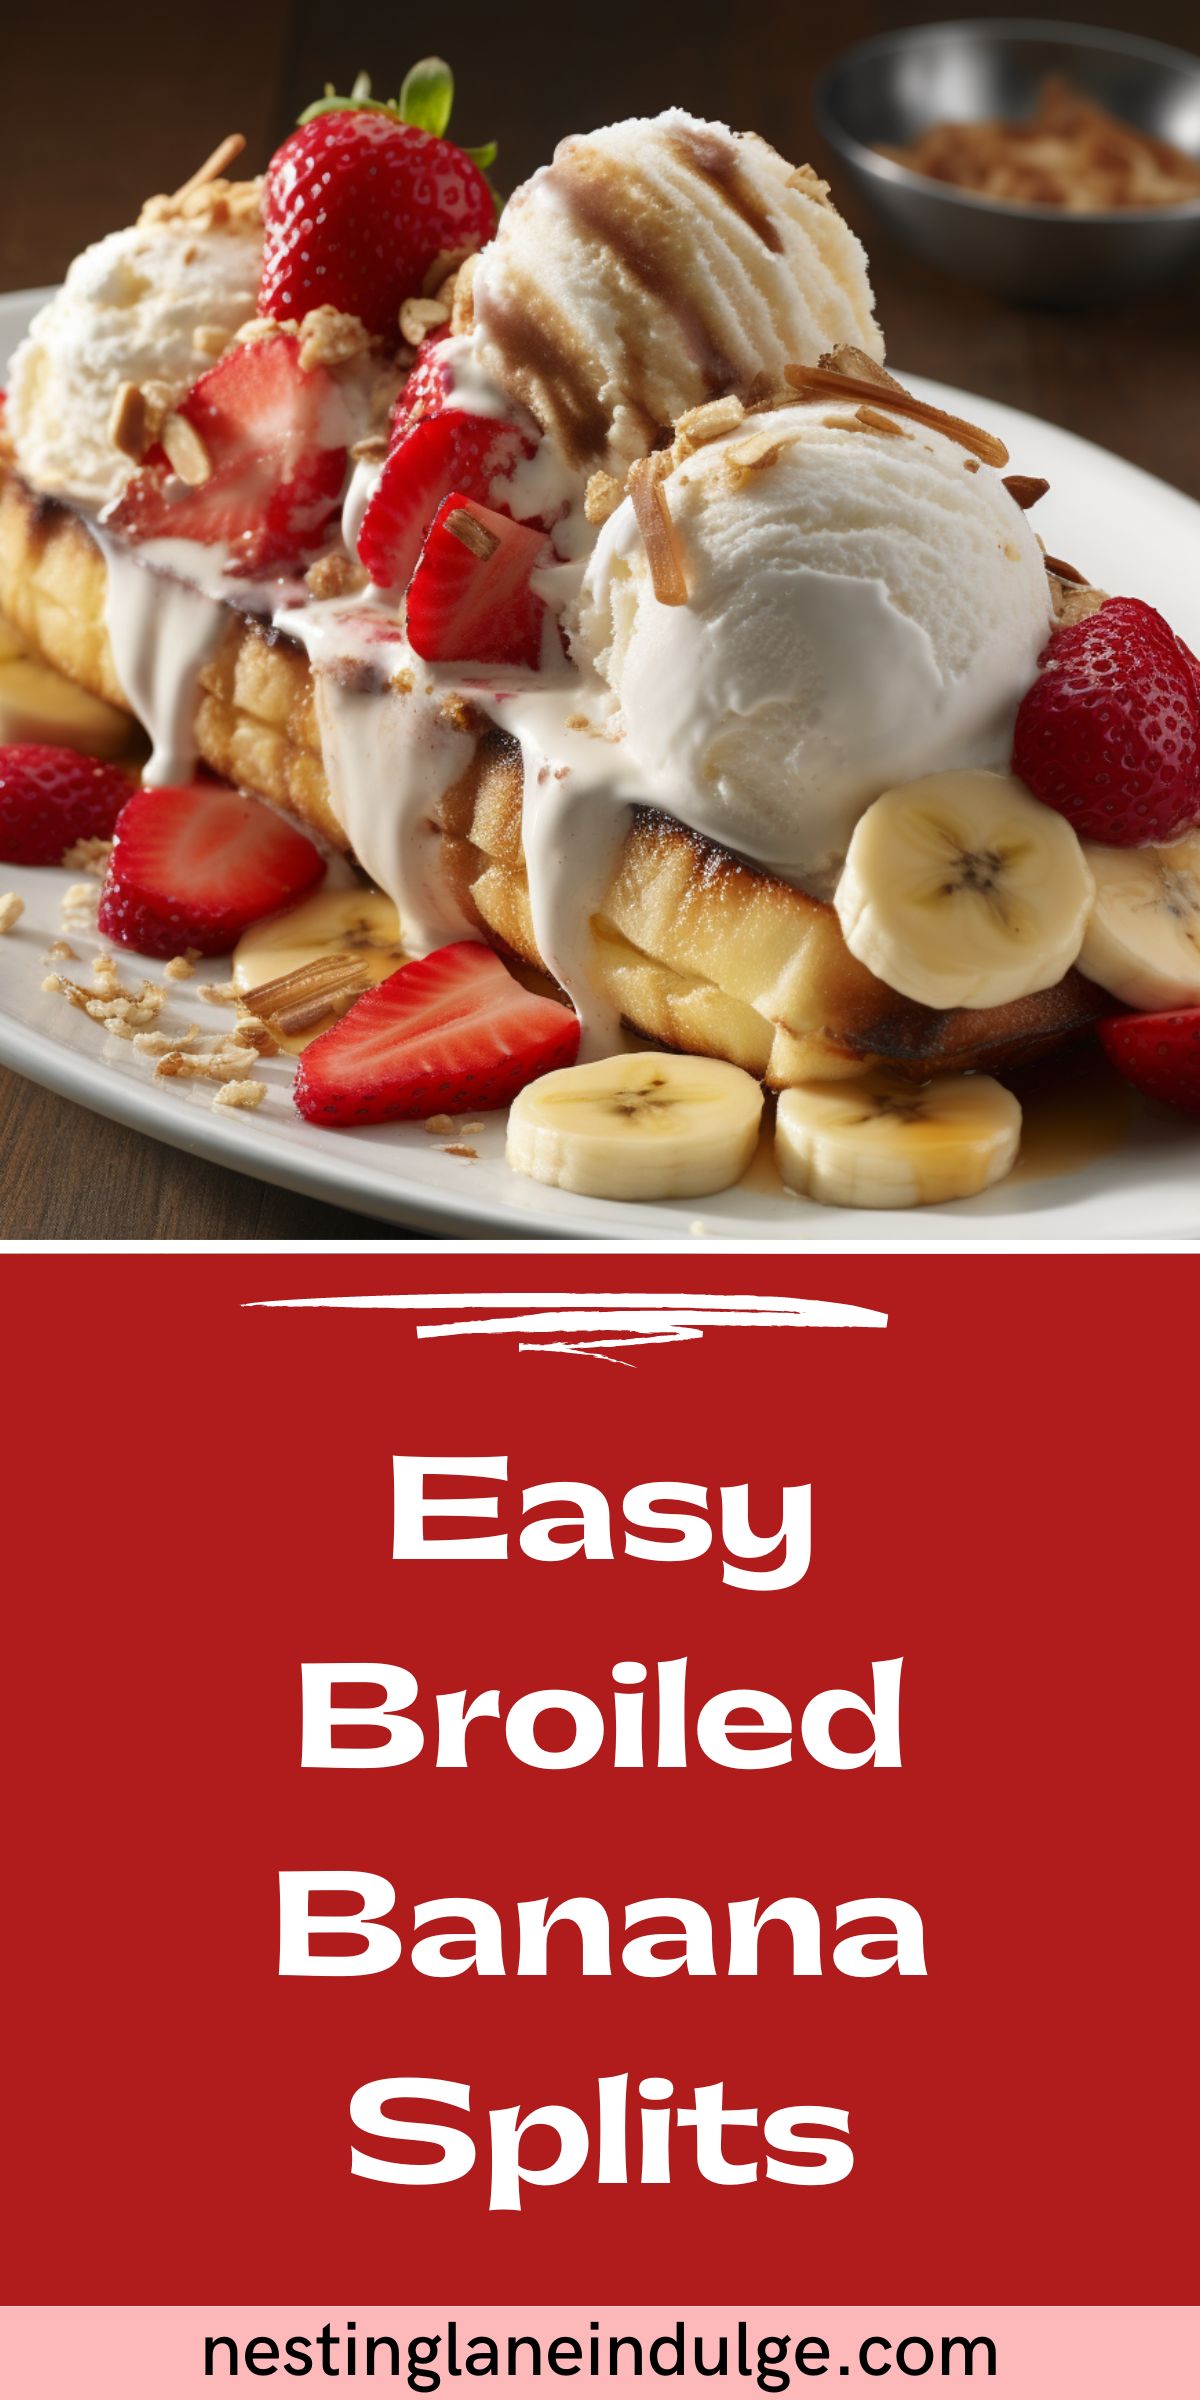 Graphic for Pinterest of Easy Broiled Banana Splits (Quick and Delicious Dessert) Recipe.